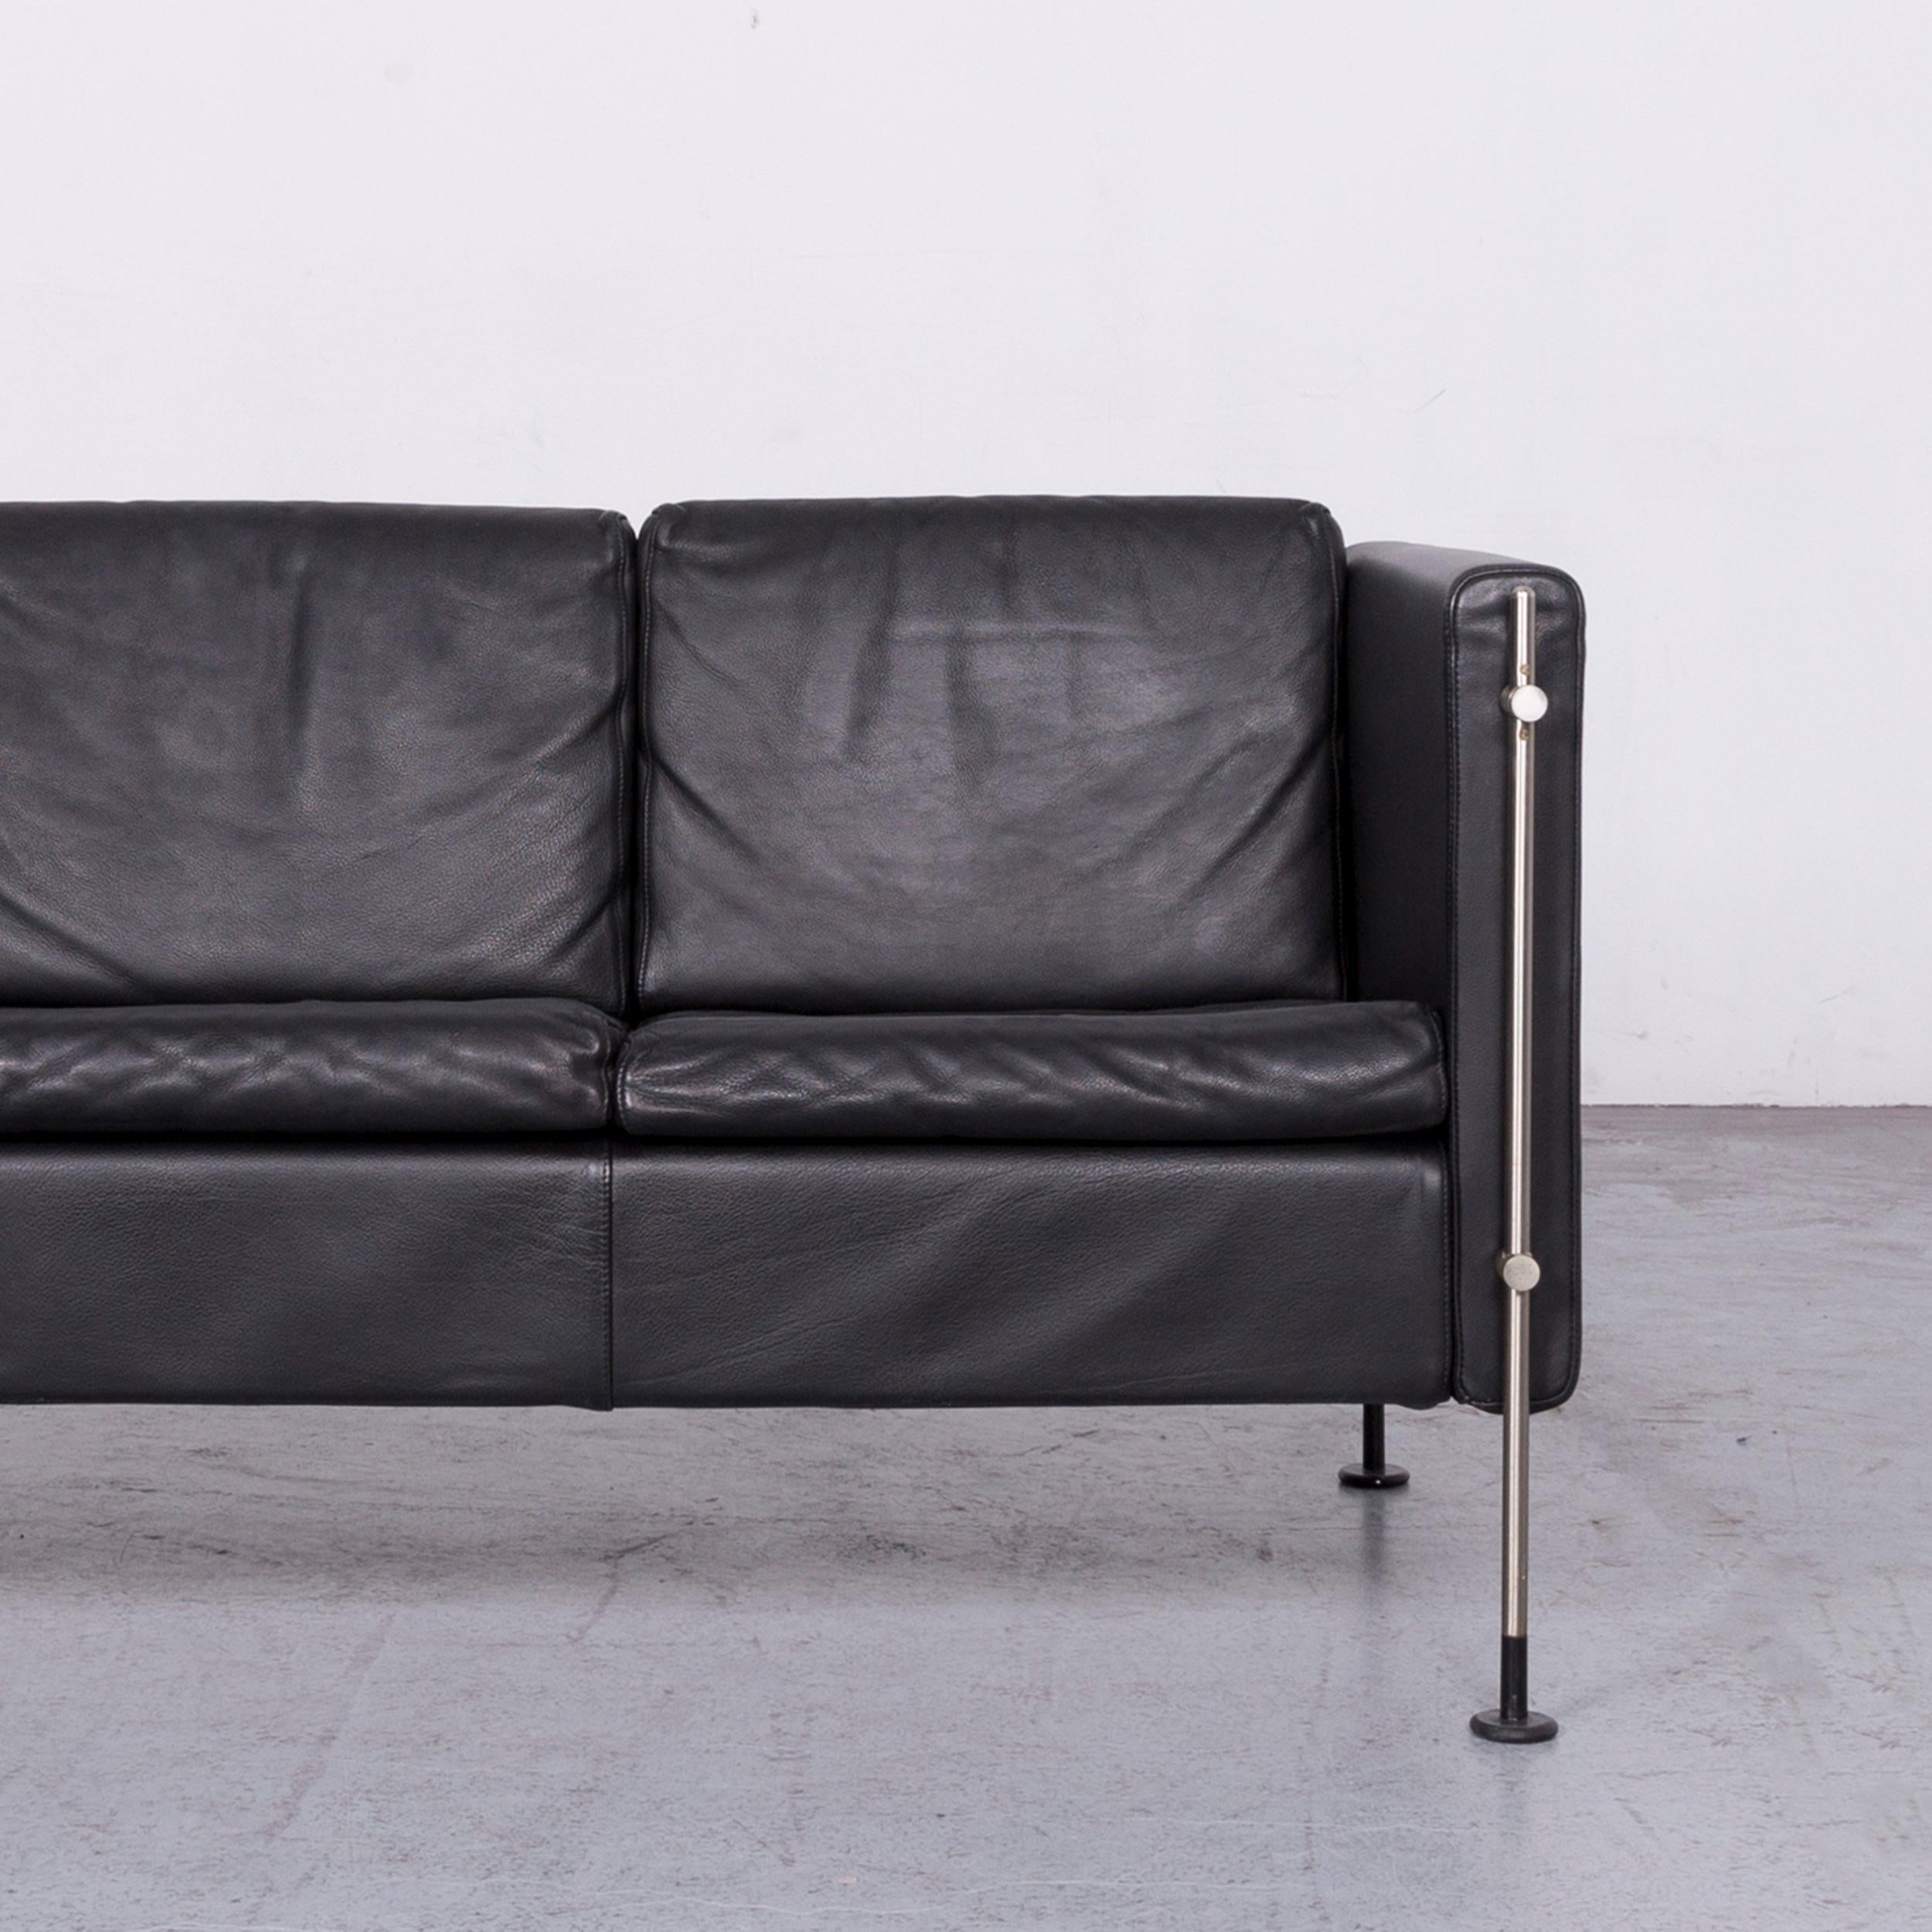 Arflex Felix Leather Sofa Black Three-Seat Chair In Good Condition For Sale In Cologne, DE